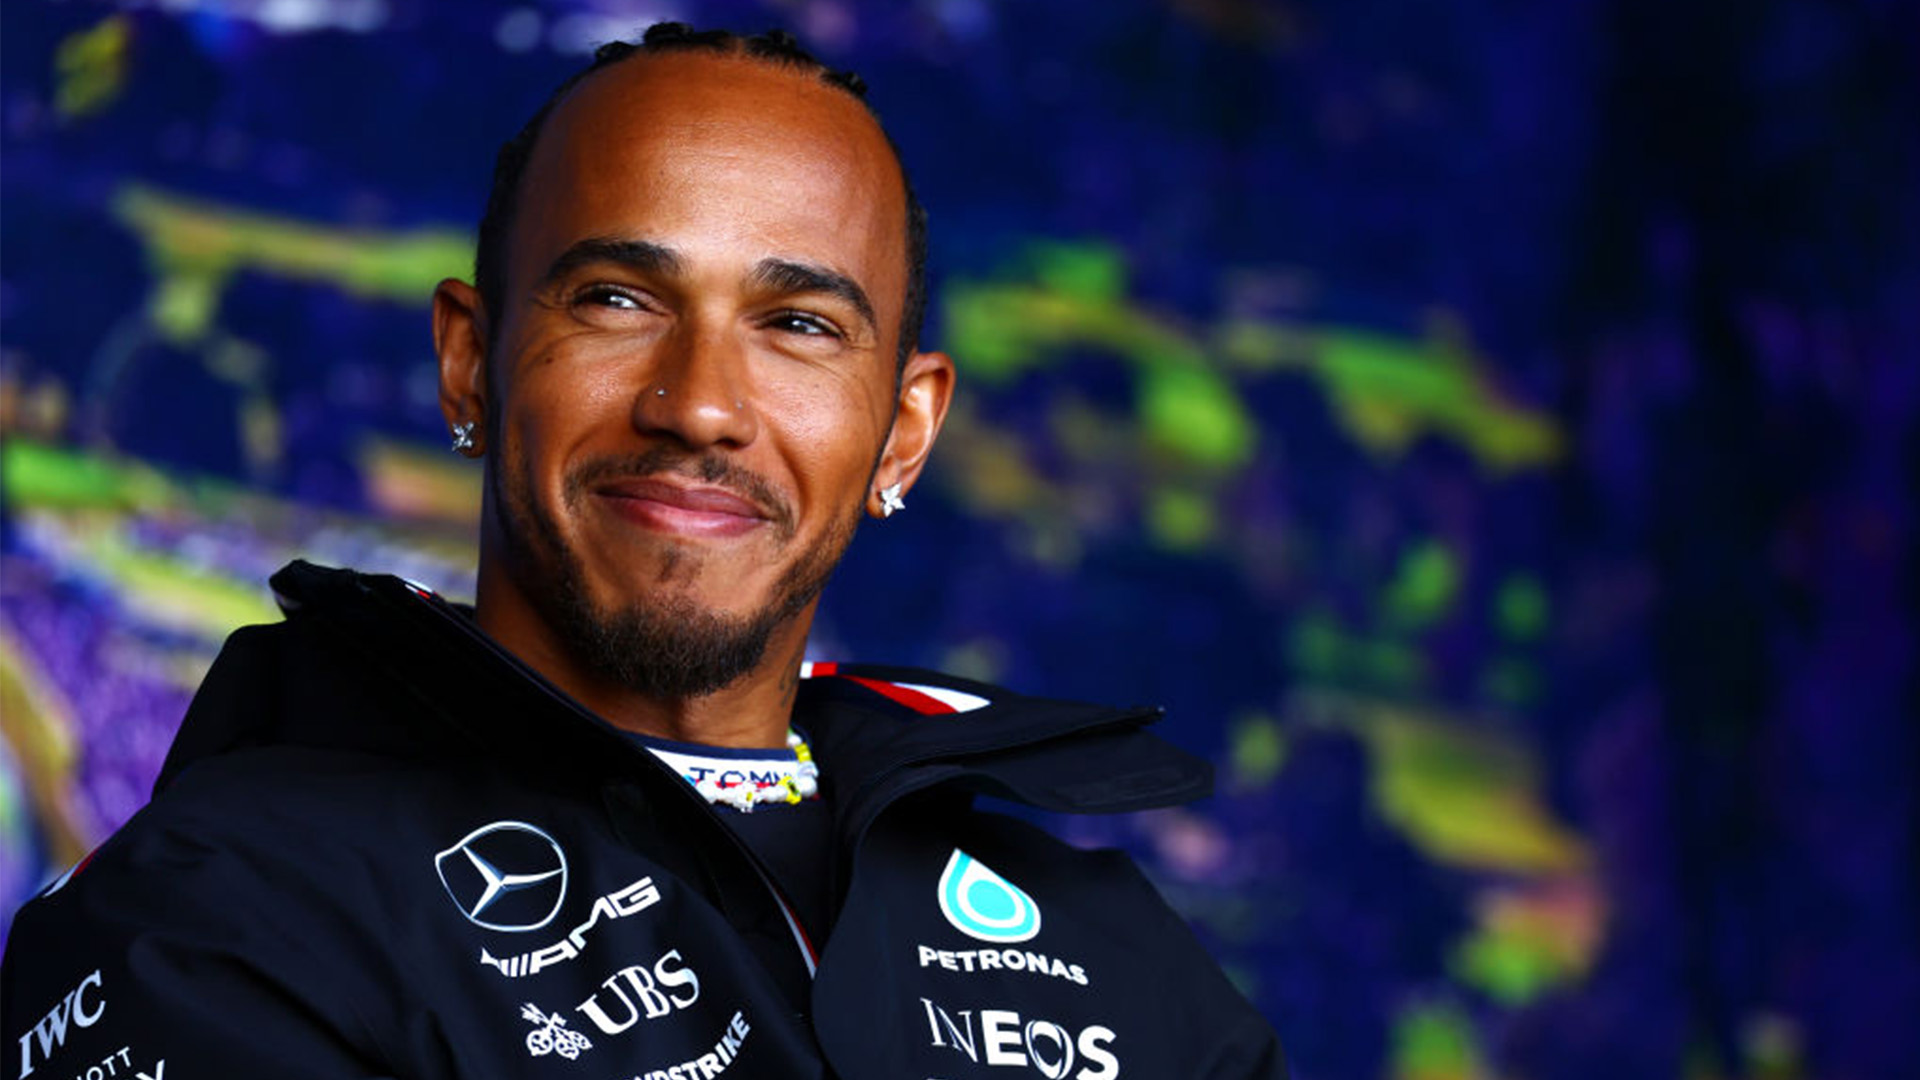 Lewis Hamilton To Open A Neat Burger In New York City, The First U.S. Location For His Vegan Fast-Food Chain